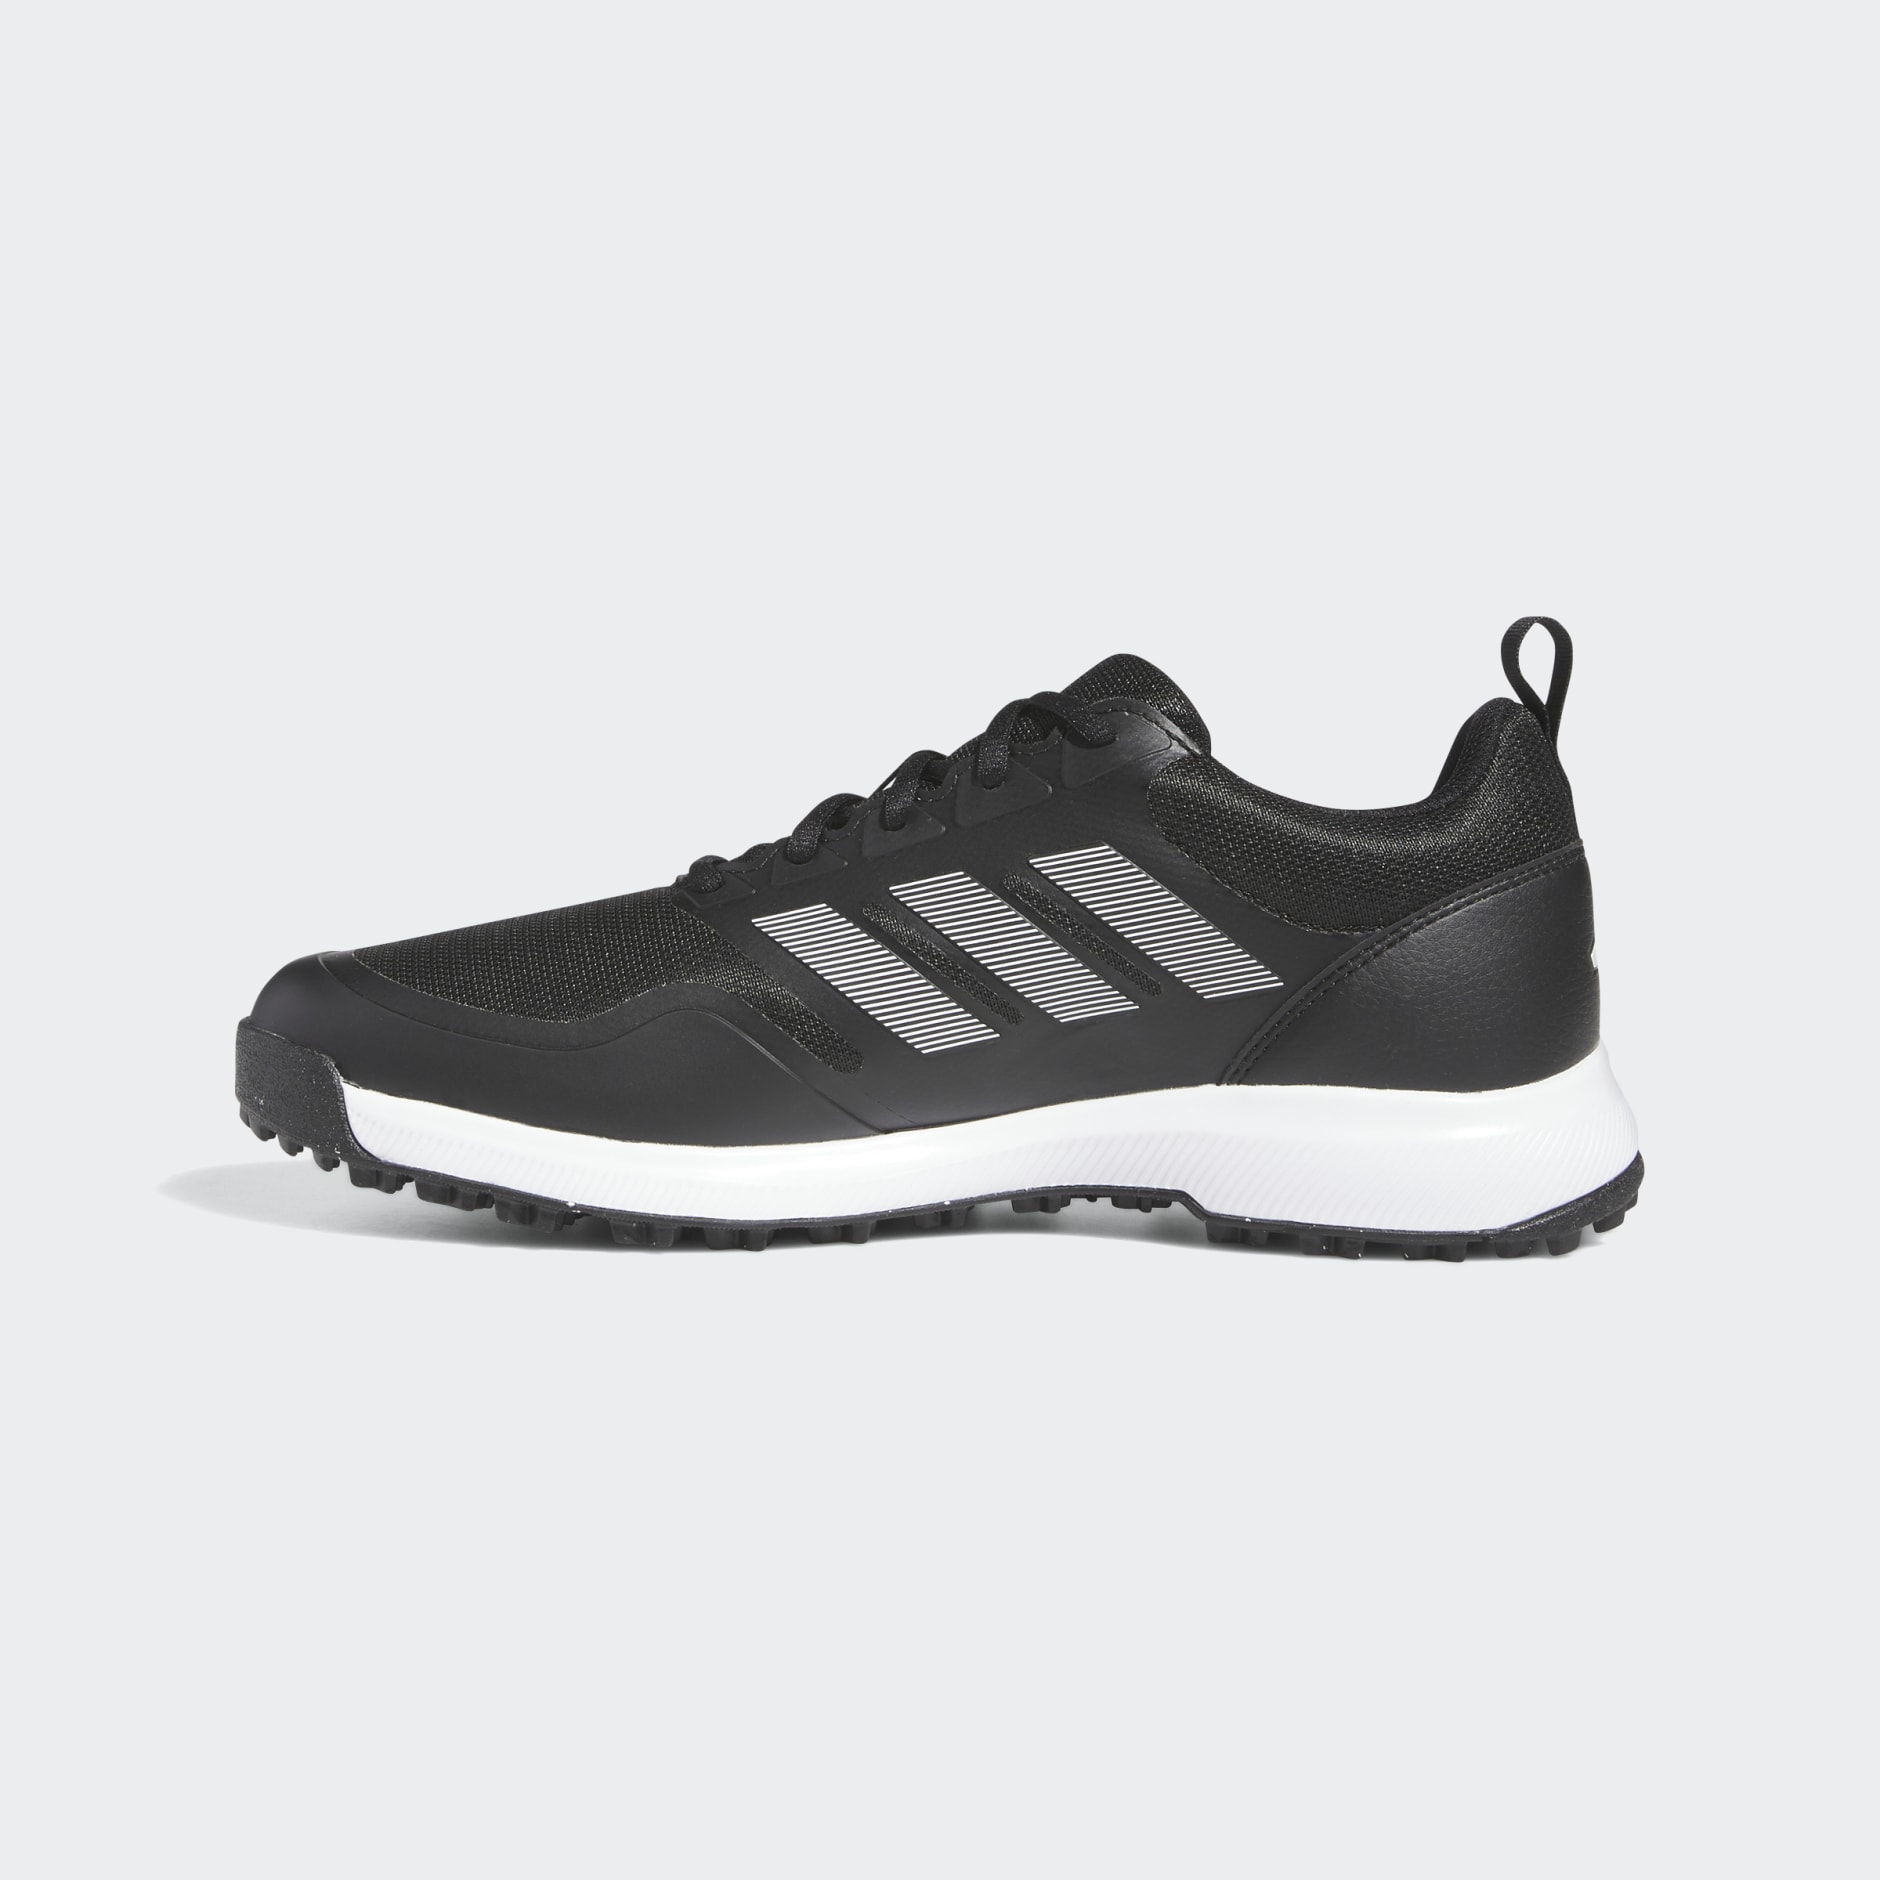 Shoes - Tech Response SL 3.0 Golf Shoes - Black | adidas South Africa